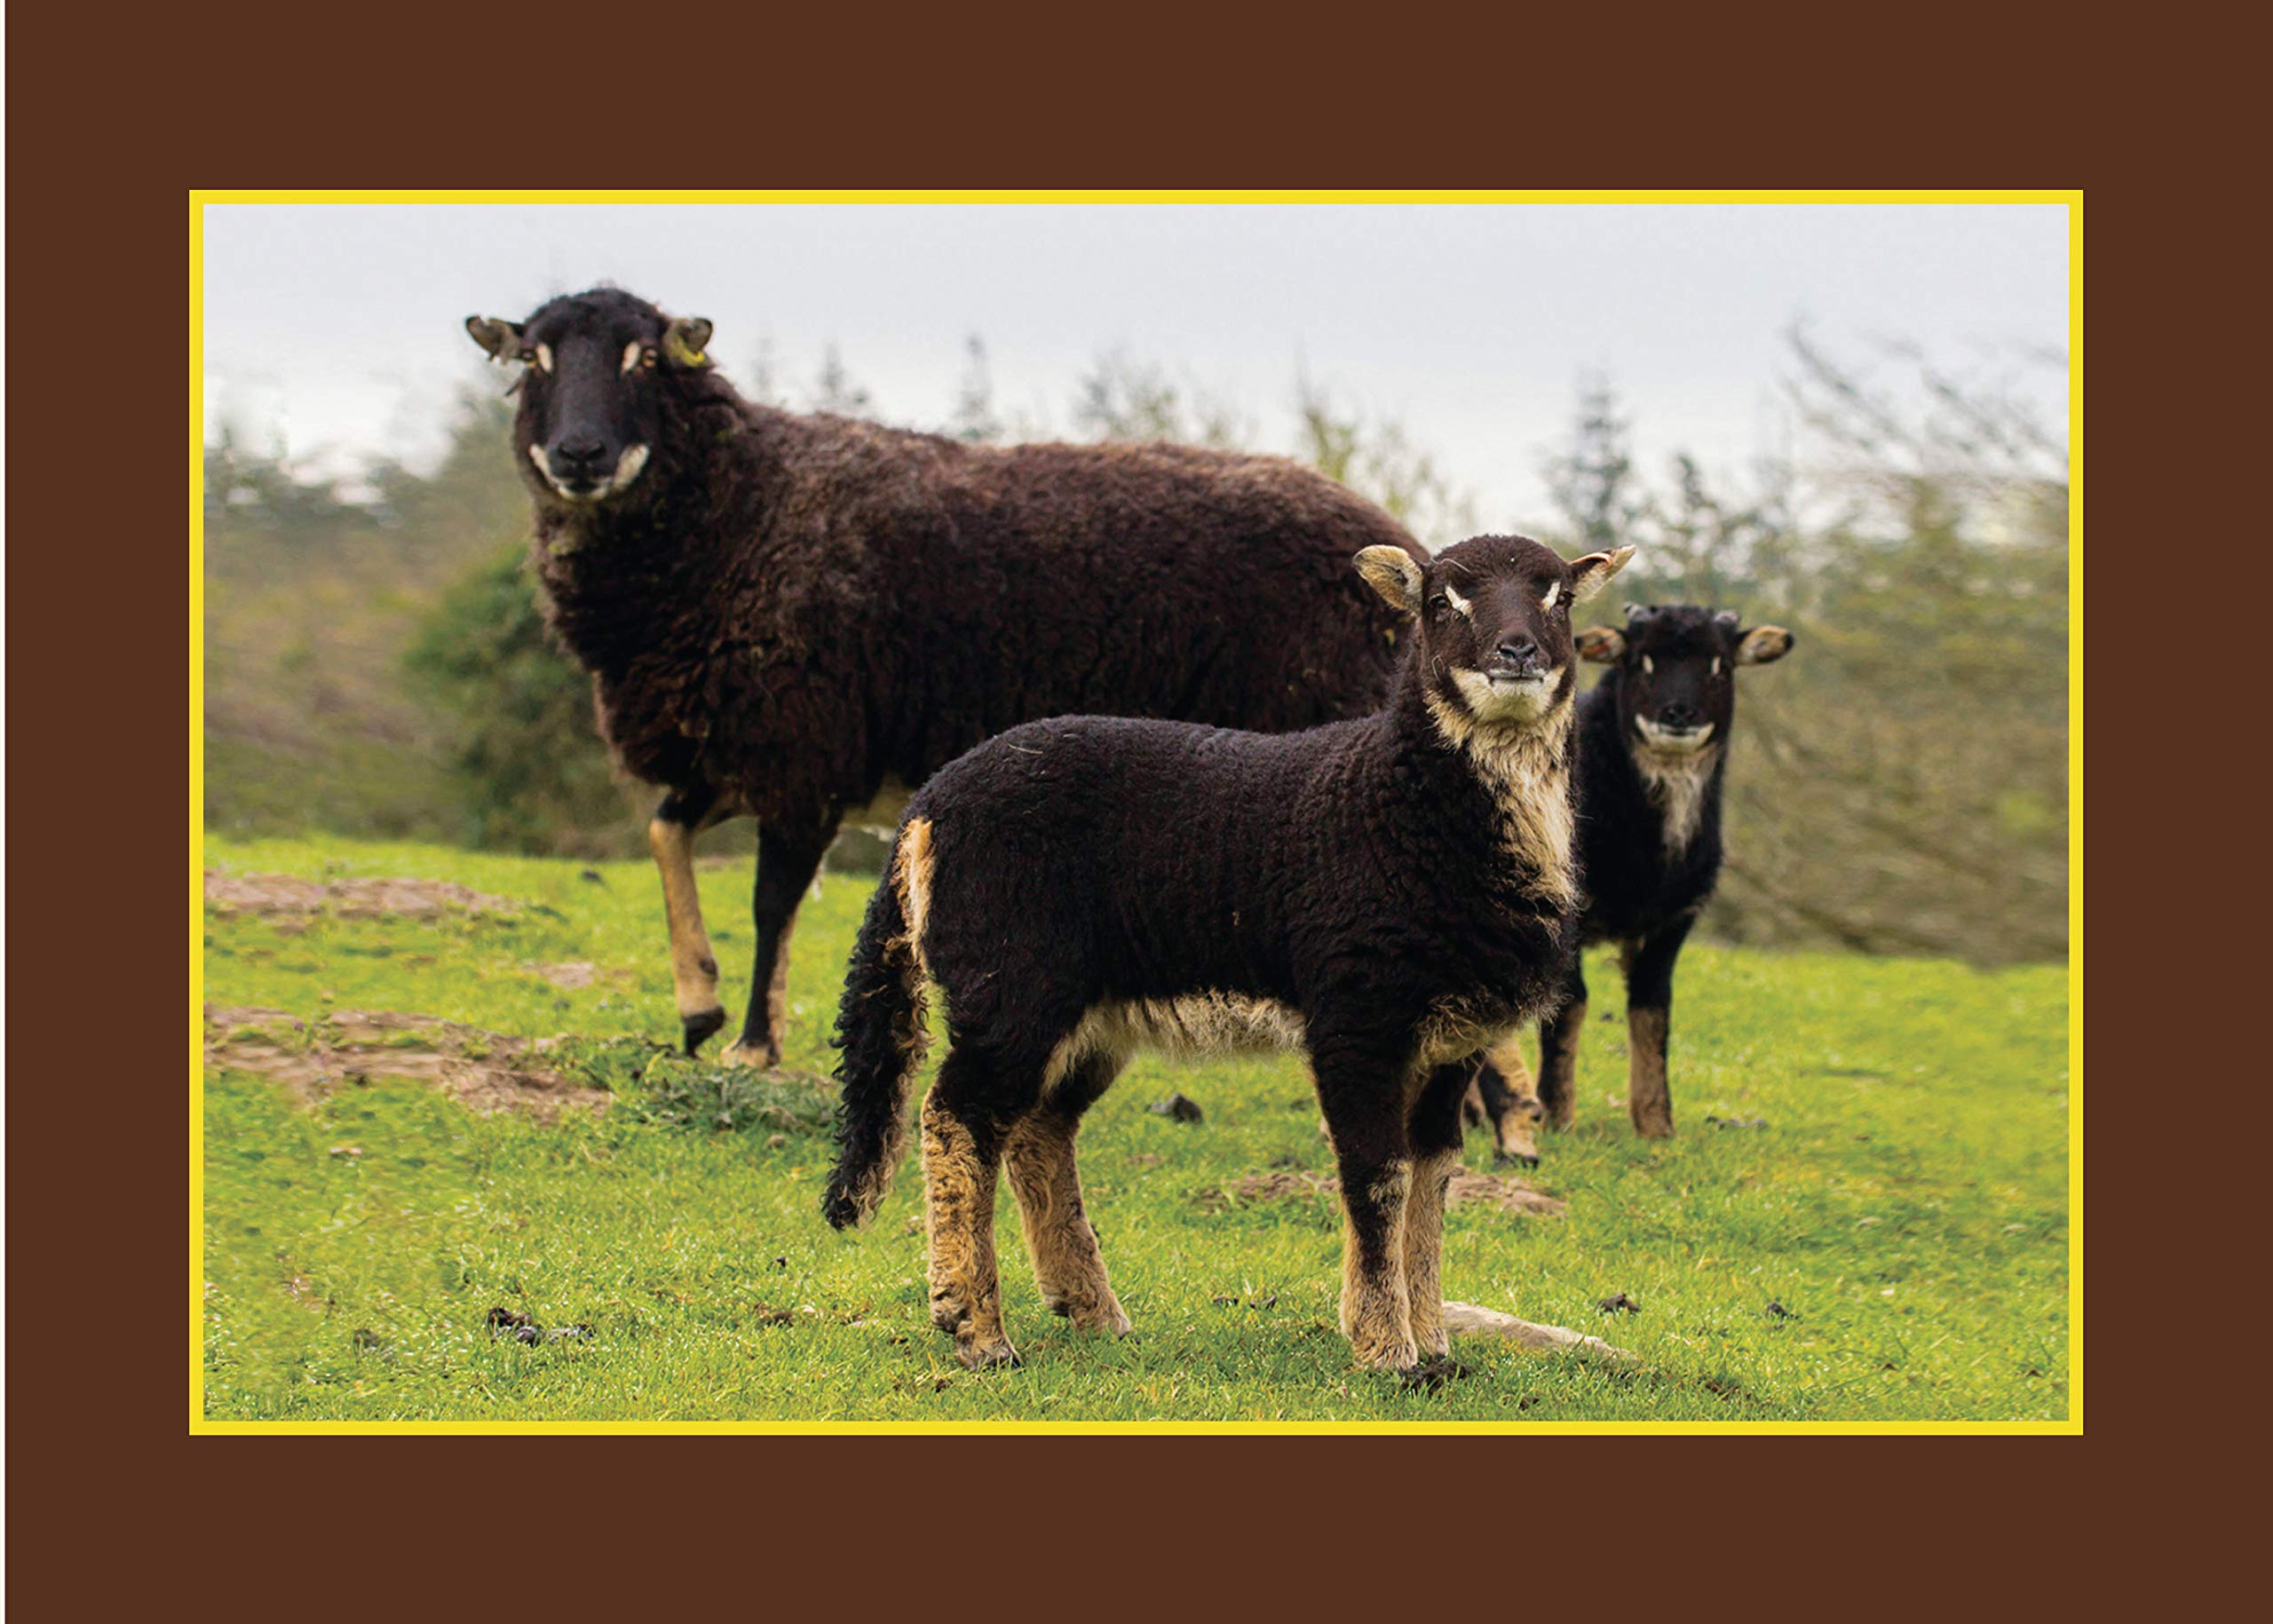 Know Your Sheep (Old Pond Books) 44 Sheep Breeds from Beulah Speckled Face to Wensleydale, with Full-Page Photos and Comprehensive Descriptions of the Appearance, History, Wool Quality, and More